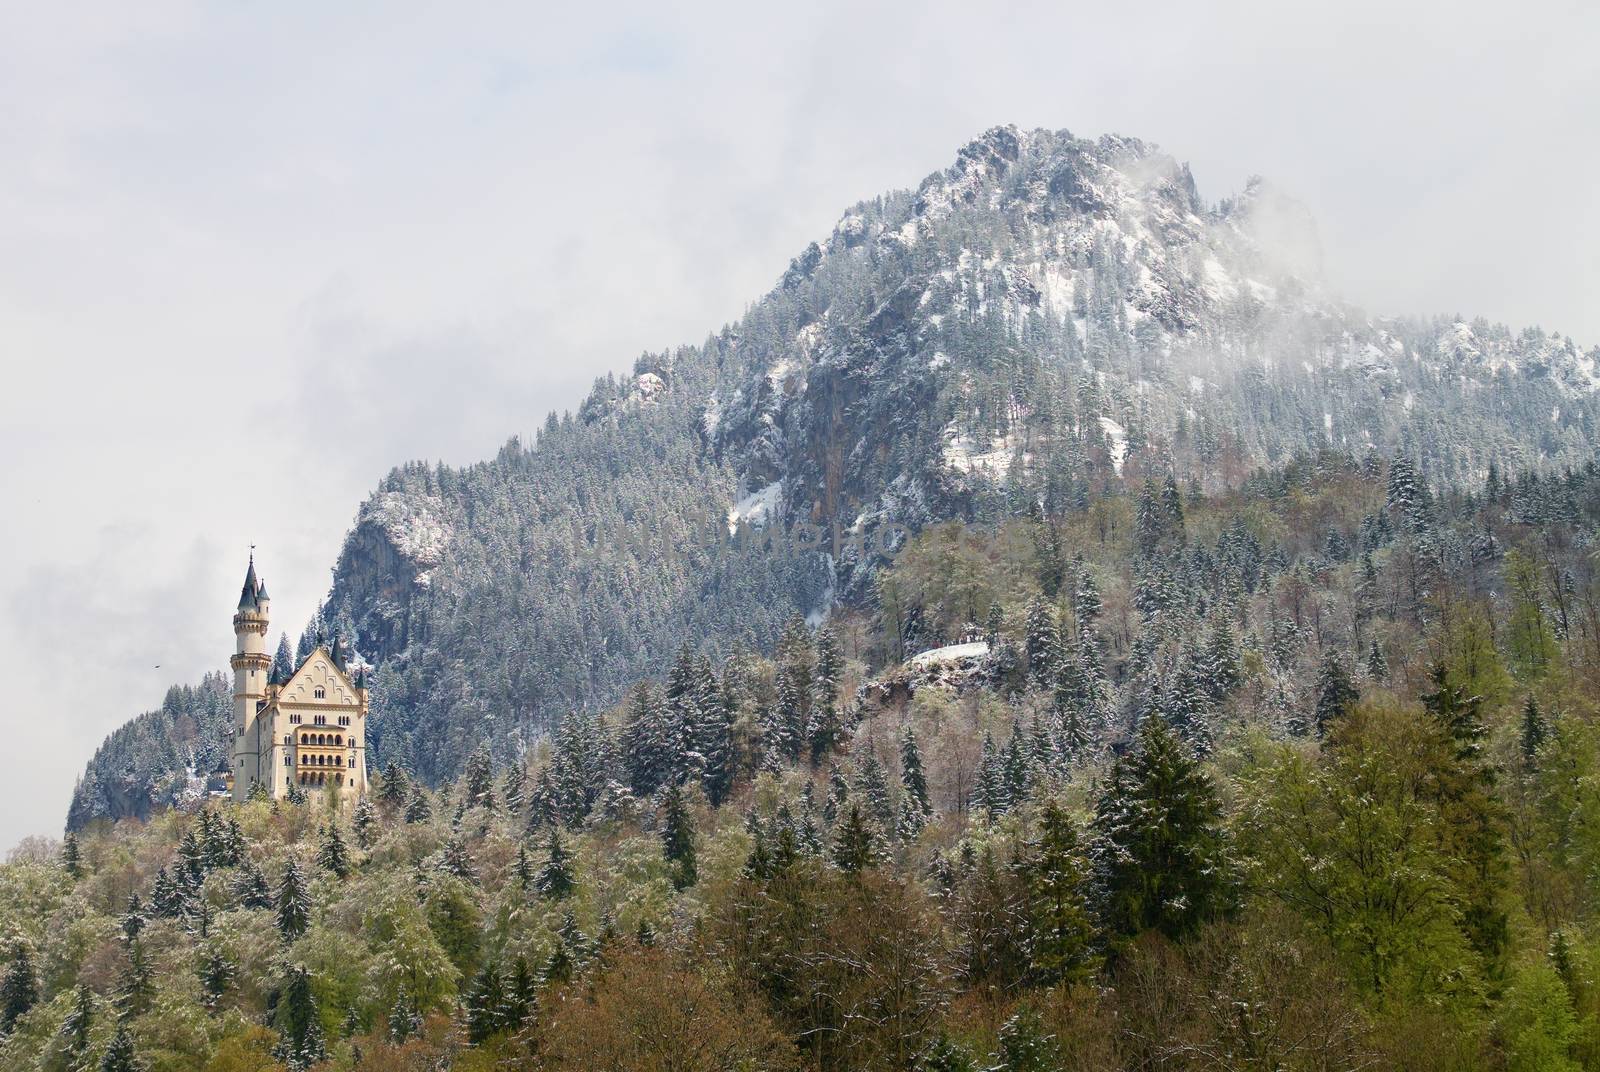 Castle in mountais, rocks and forest covered fresh snow by rdonar2